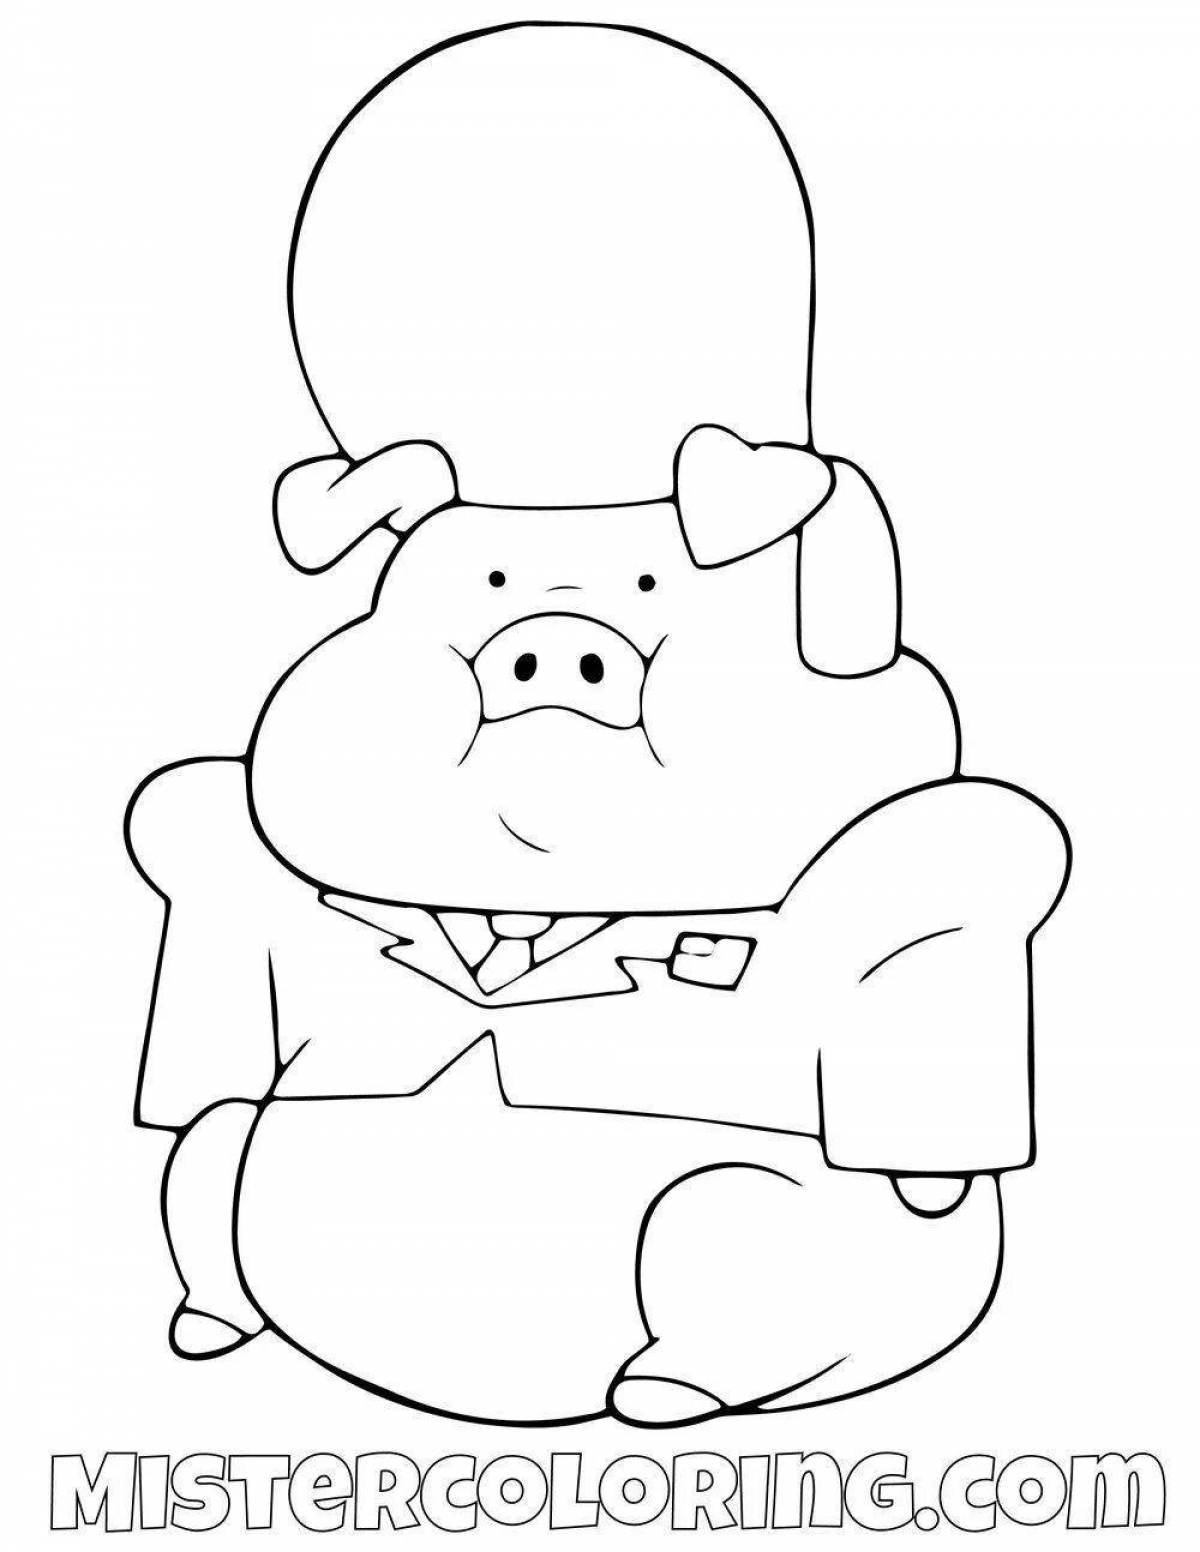 Glowing mabel and chubby coloring page